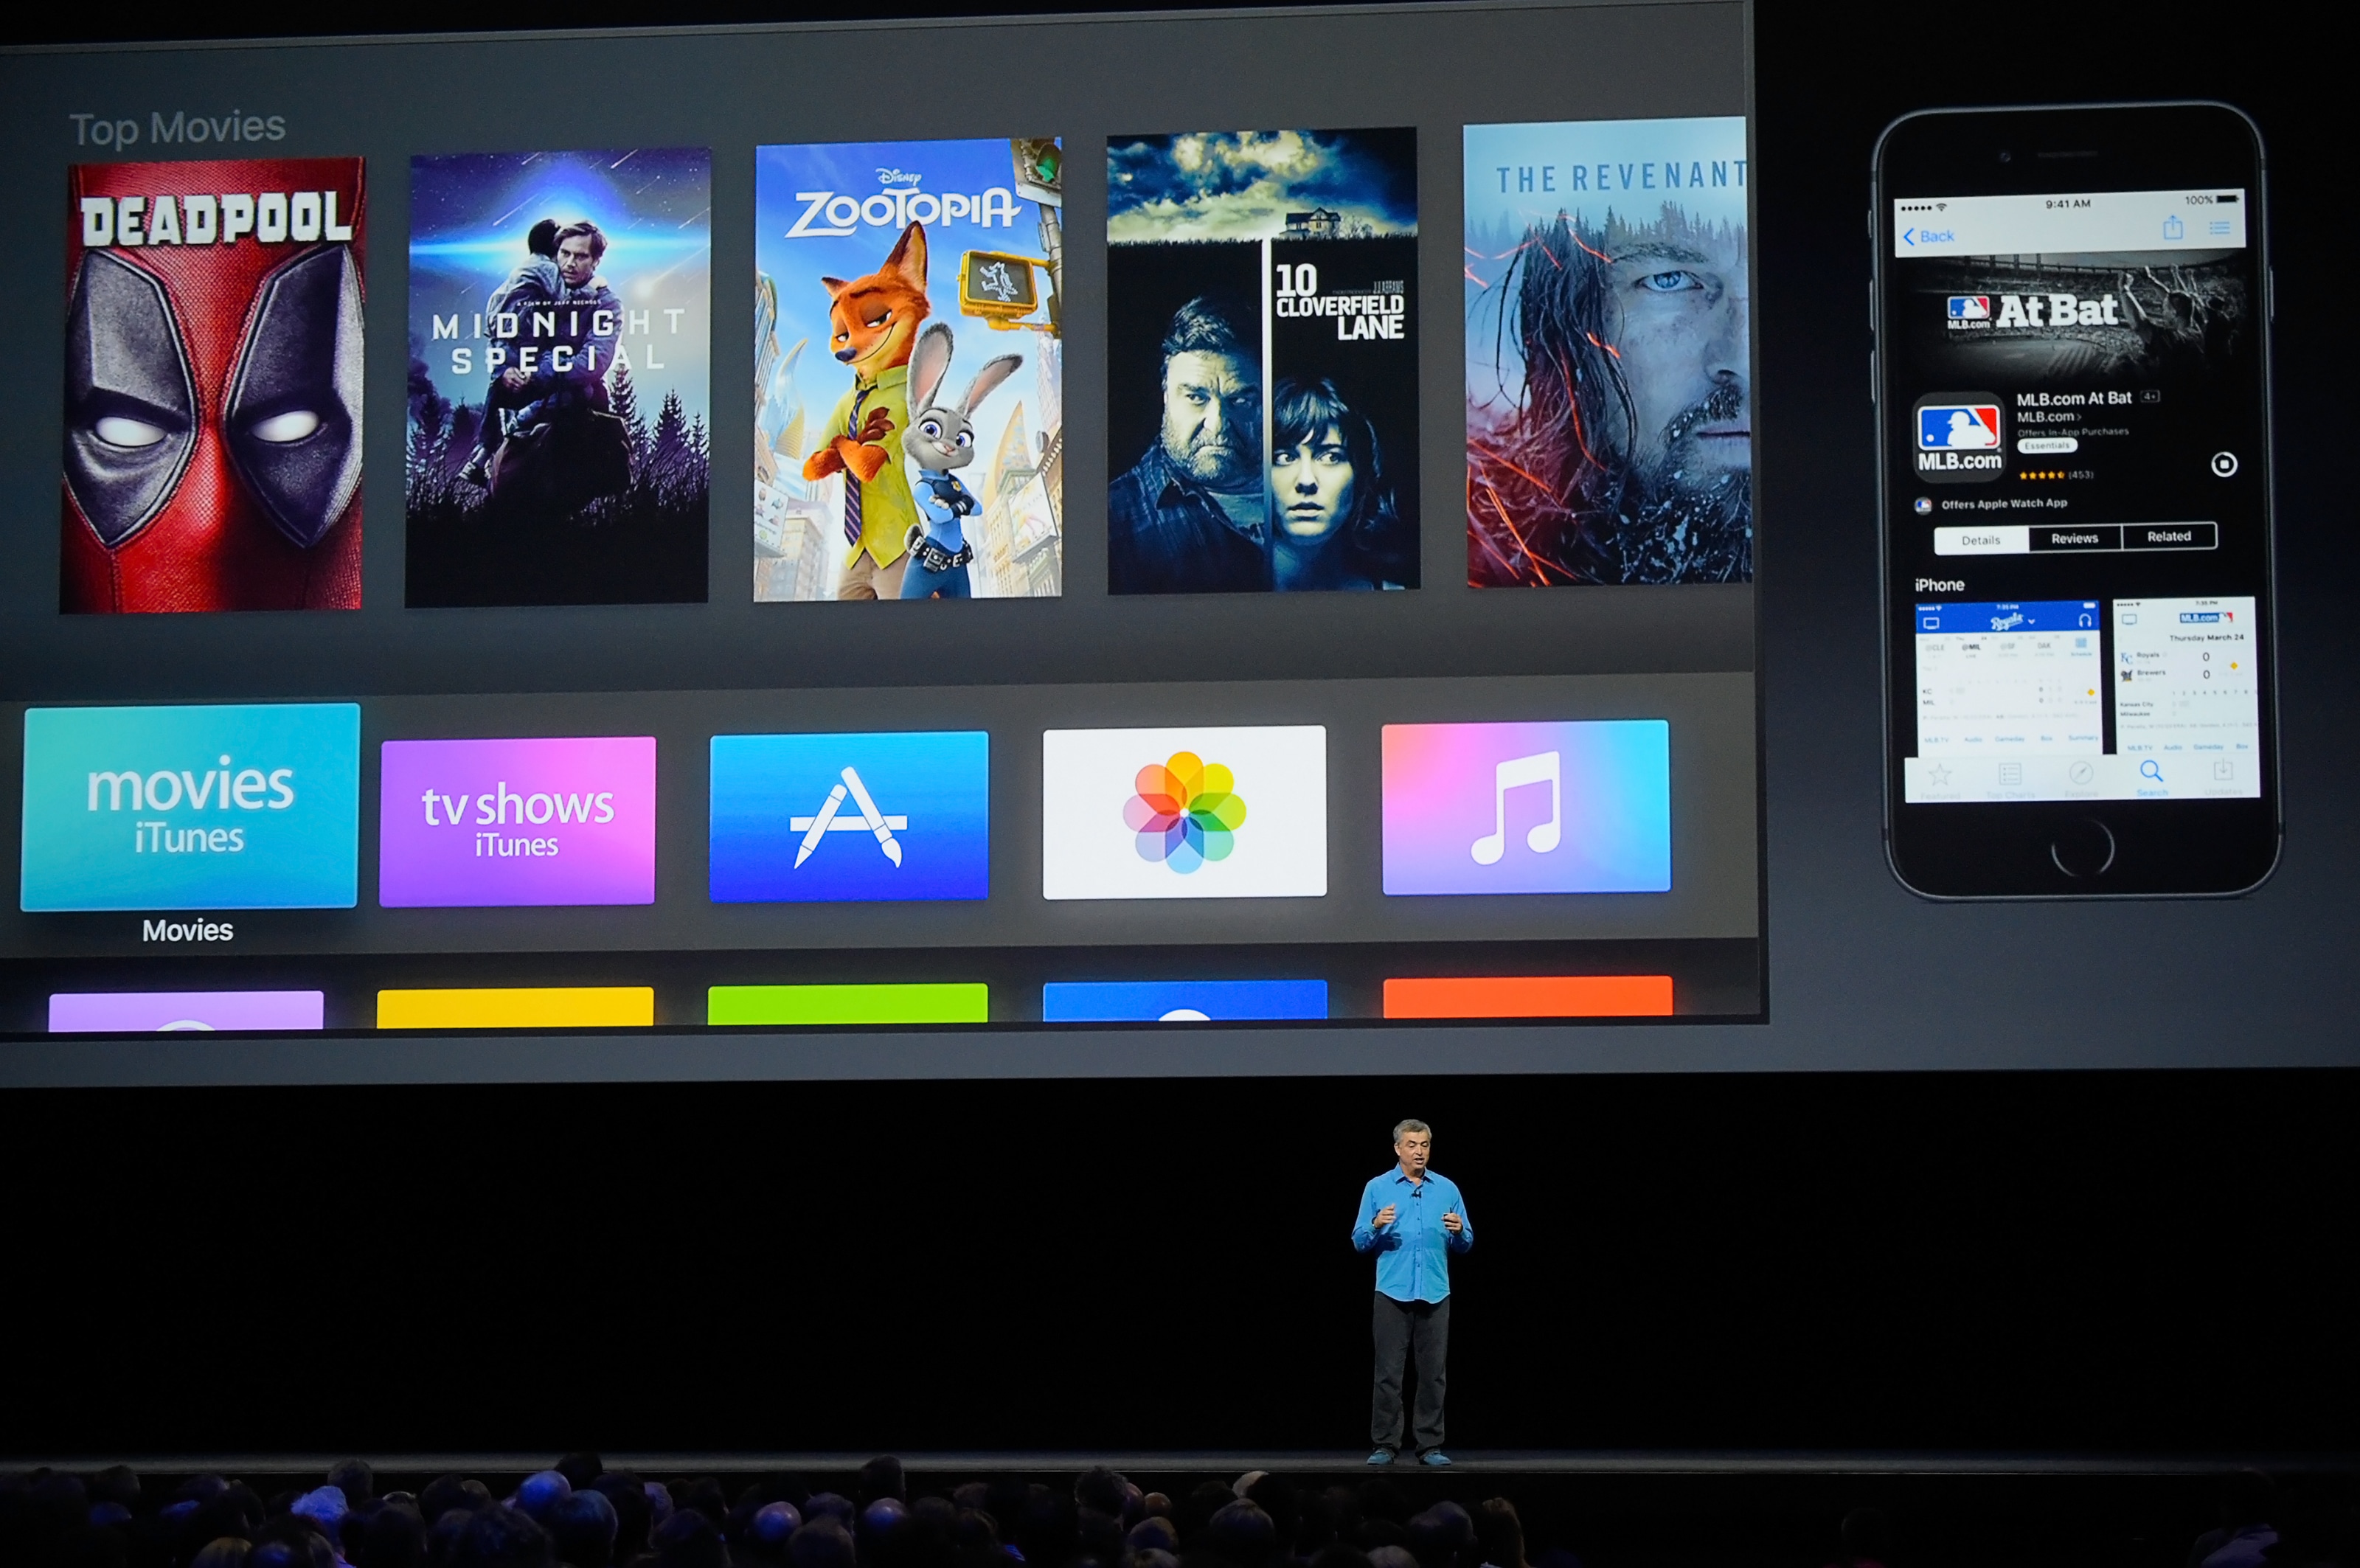 Eddy Cue on the WWDC 2016 keynote stage talking about tvOS